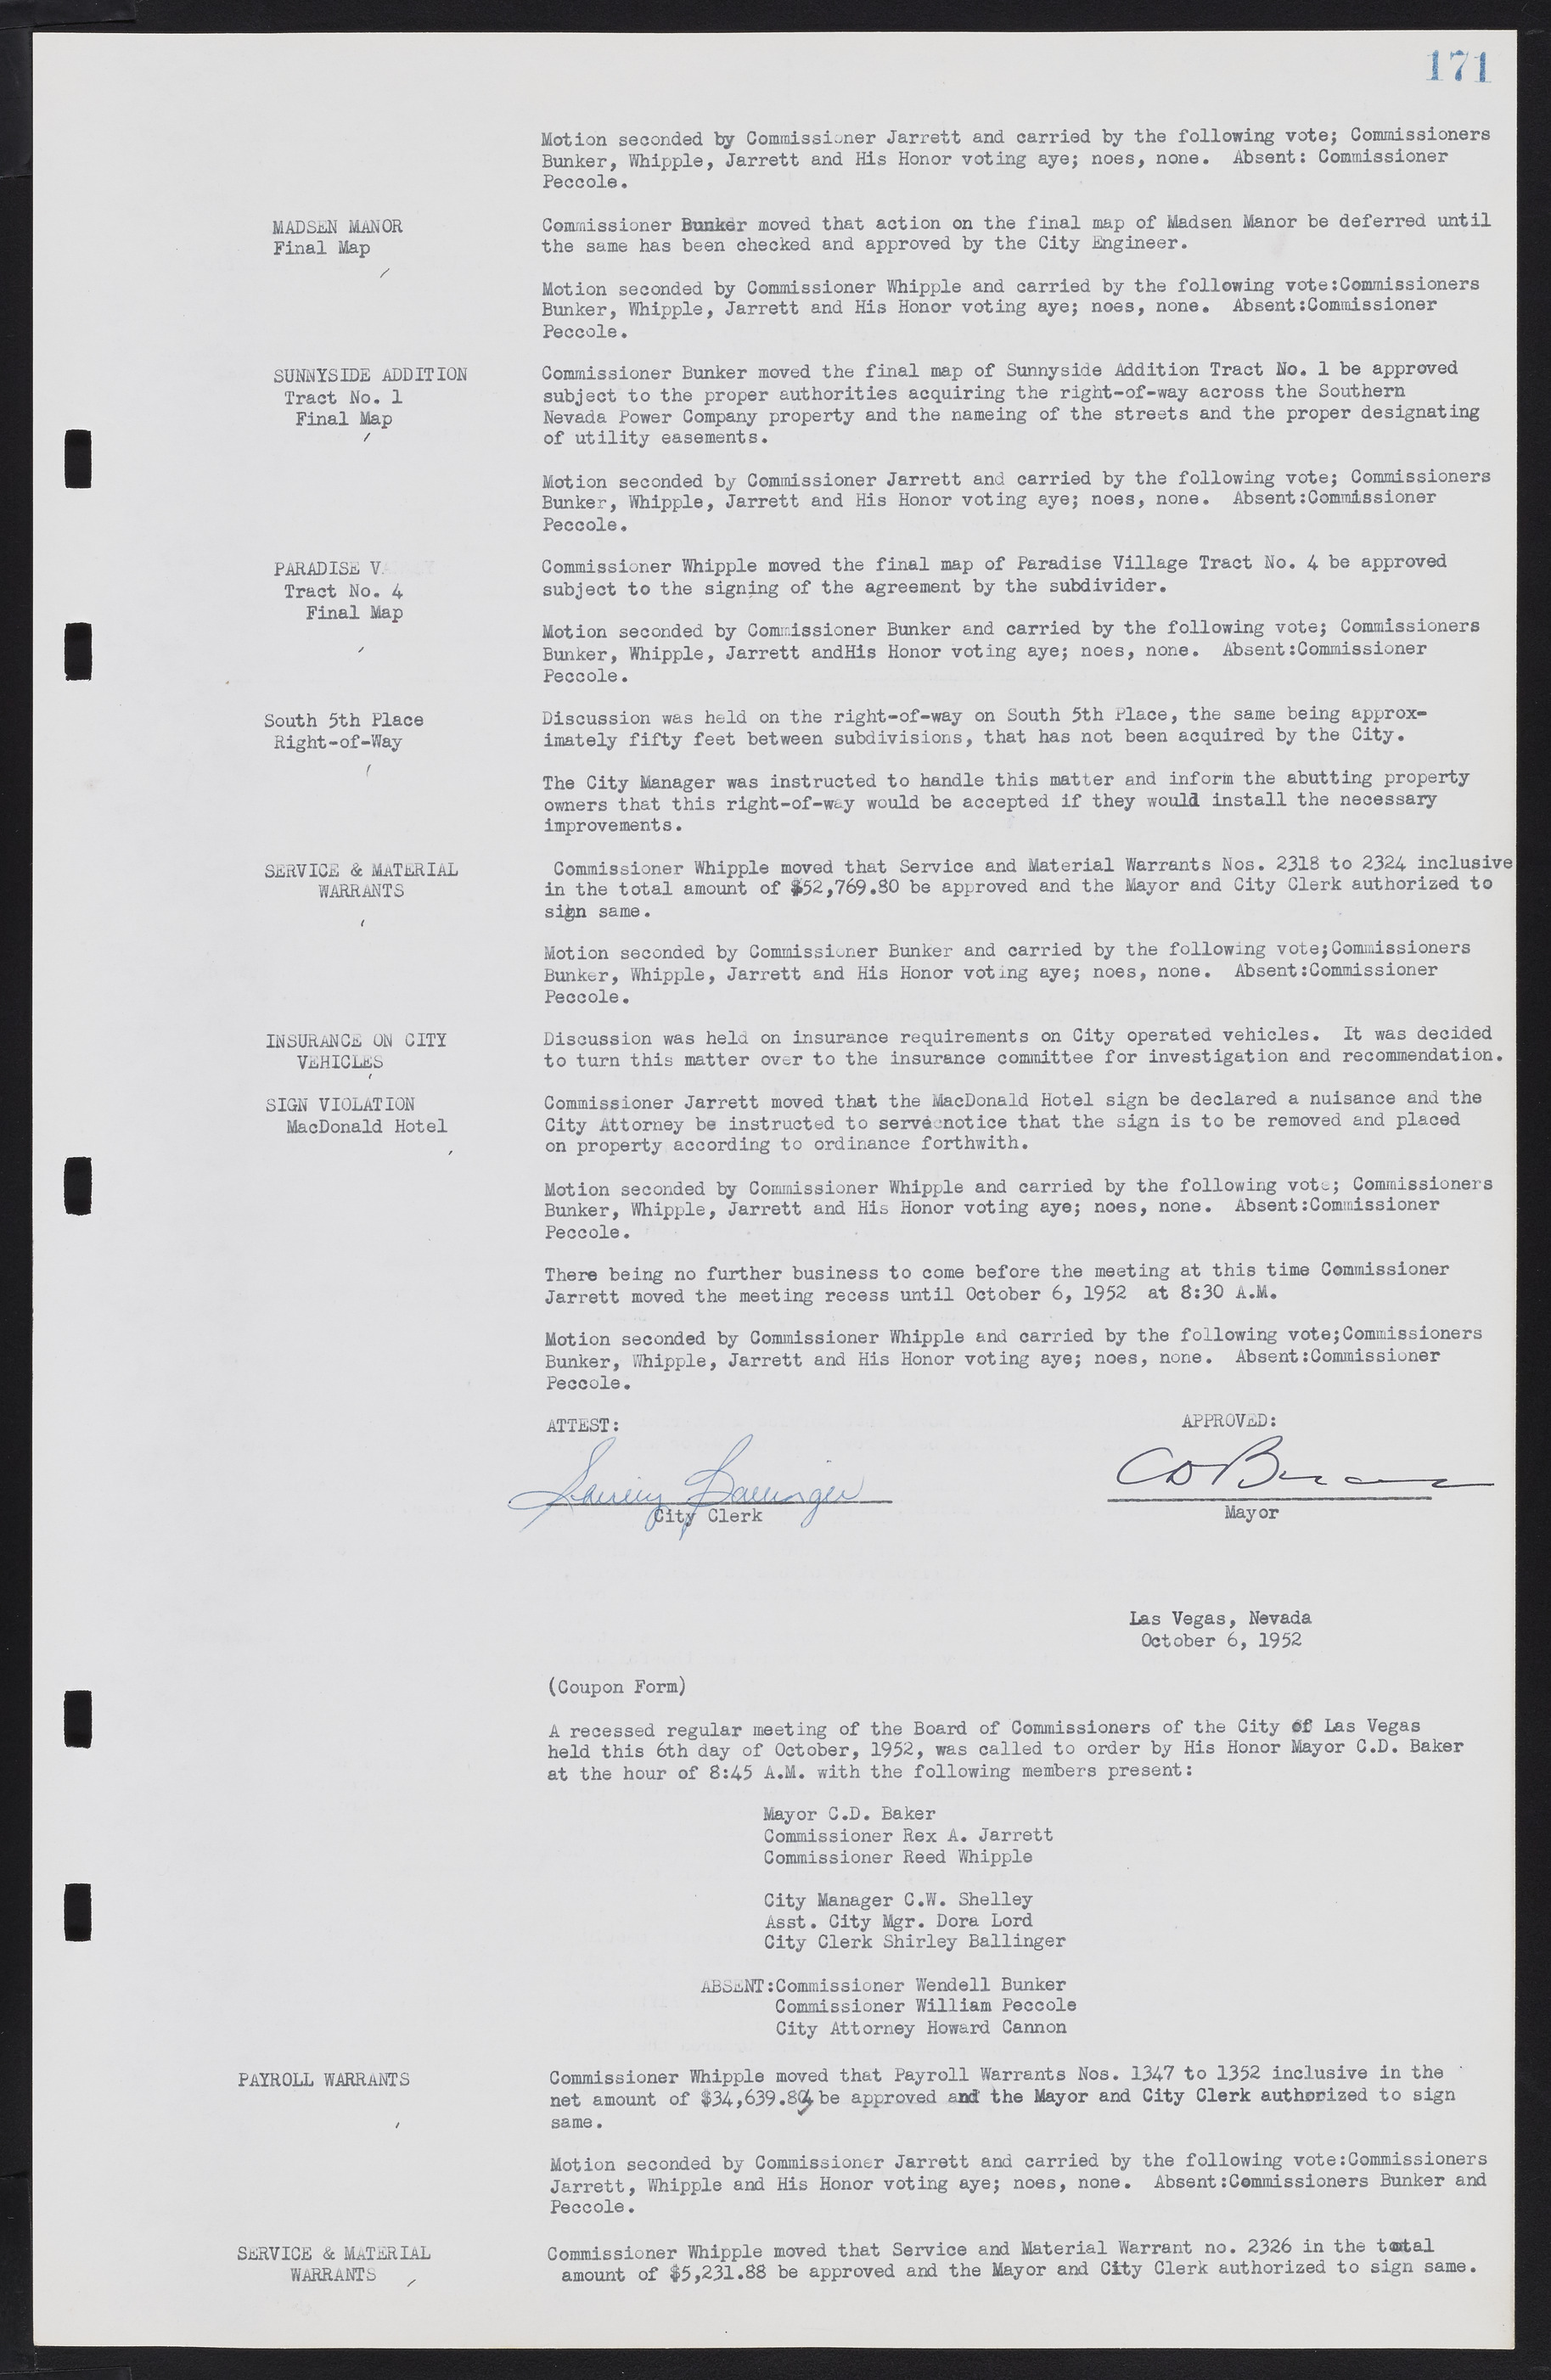 Las Vegas City Commission Minutes, May 26, 1952 to February 17, 1954, lvc000008-185